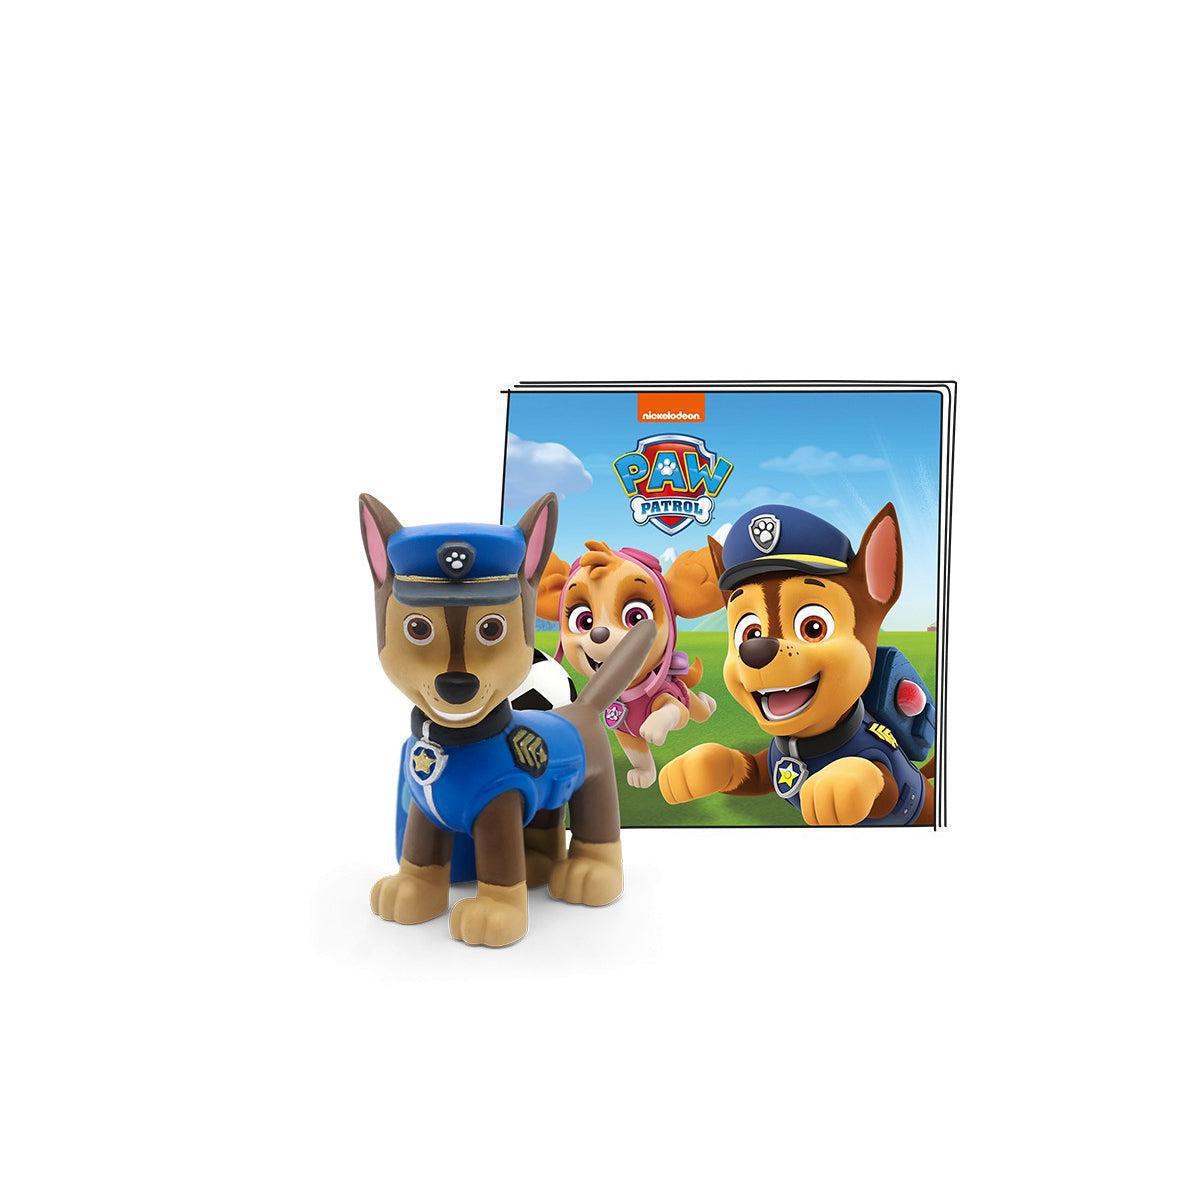 Tonies Paw Patrol - Chase - Volume 2 - Audio Character for use with Toniebox Player